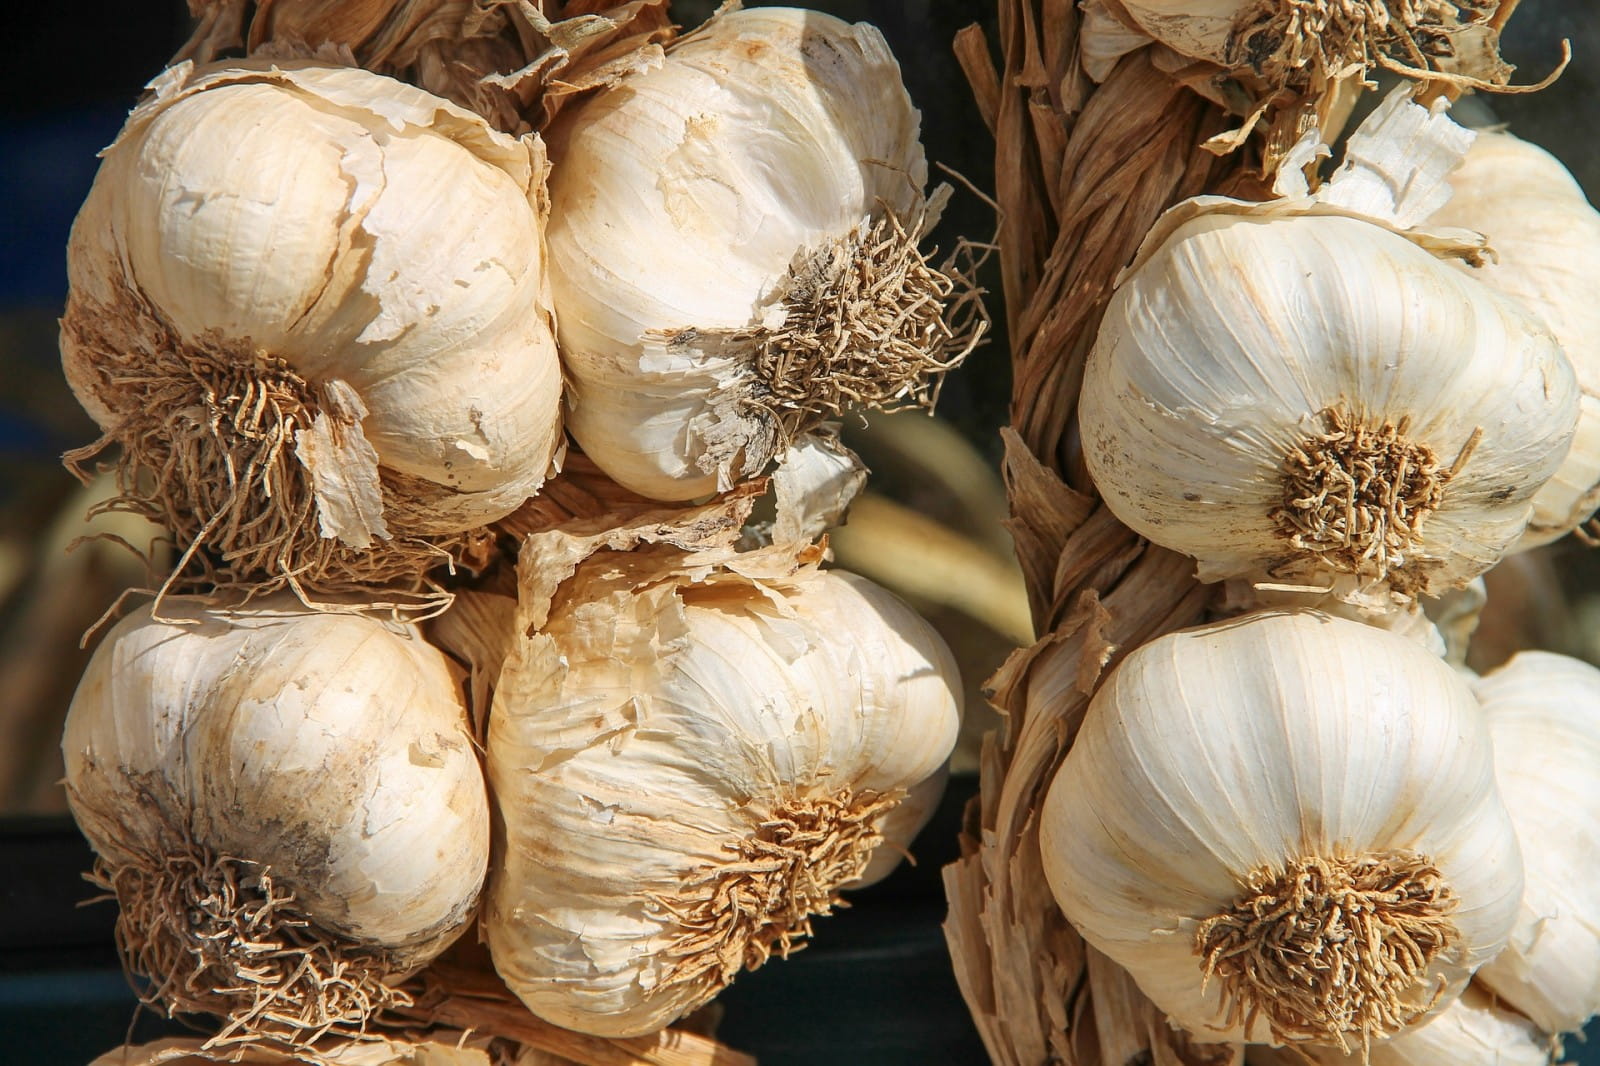 What impact does garlic have on wine pairing?